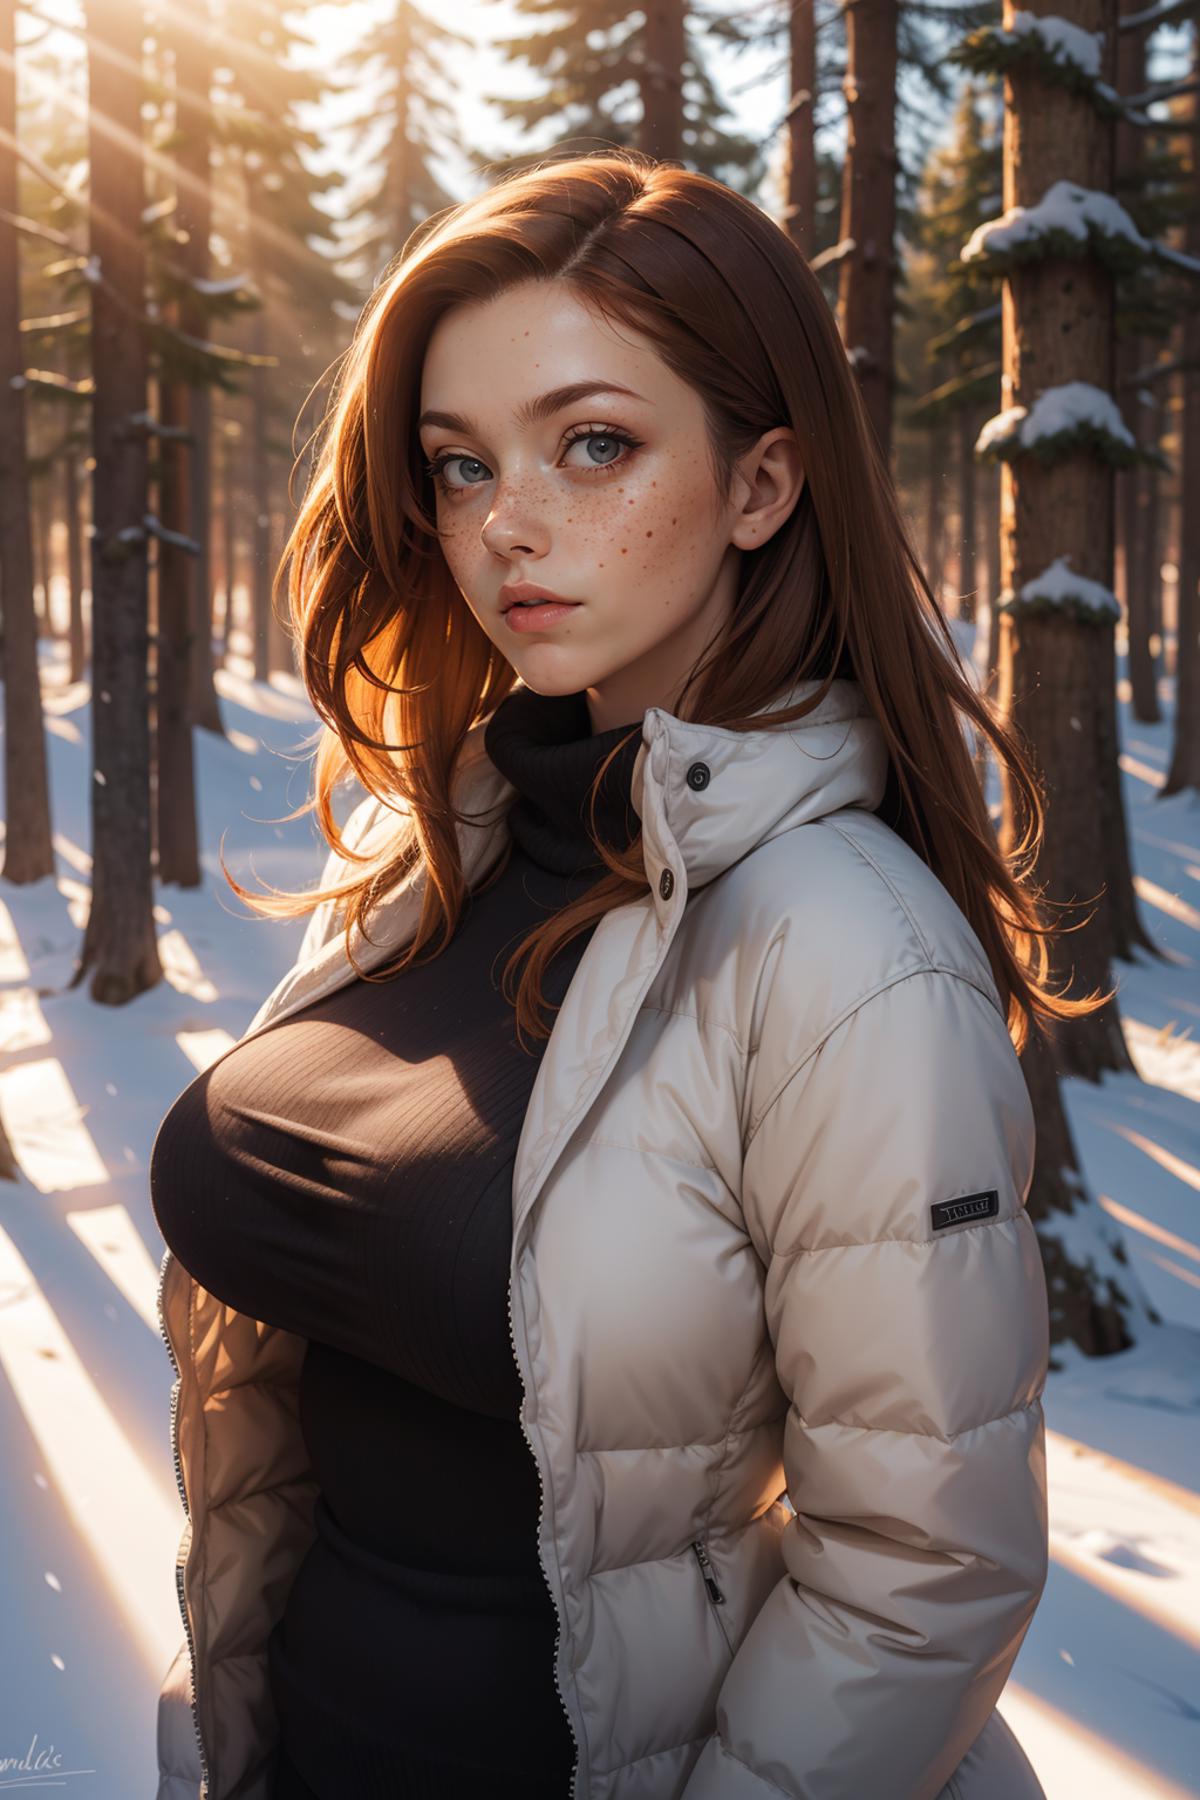 A woman with brown hair and a white jacket standing in the snow.